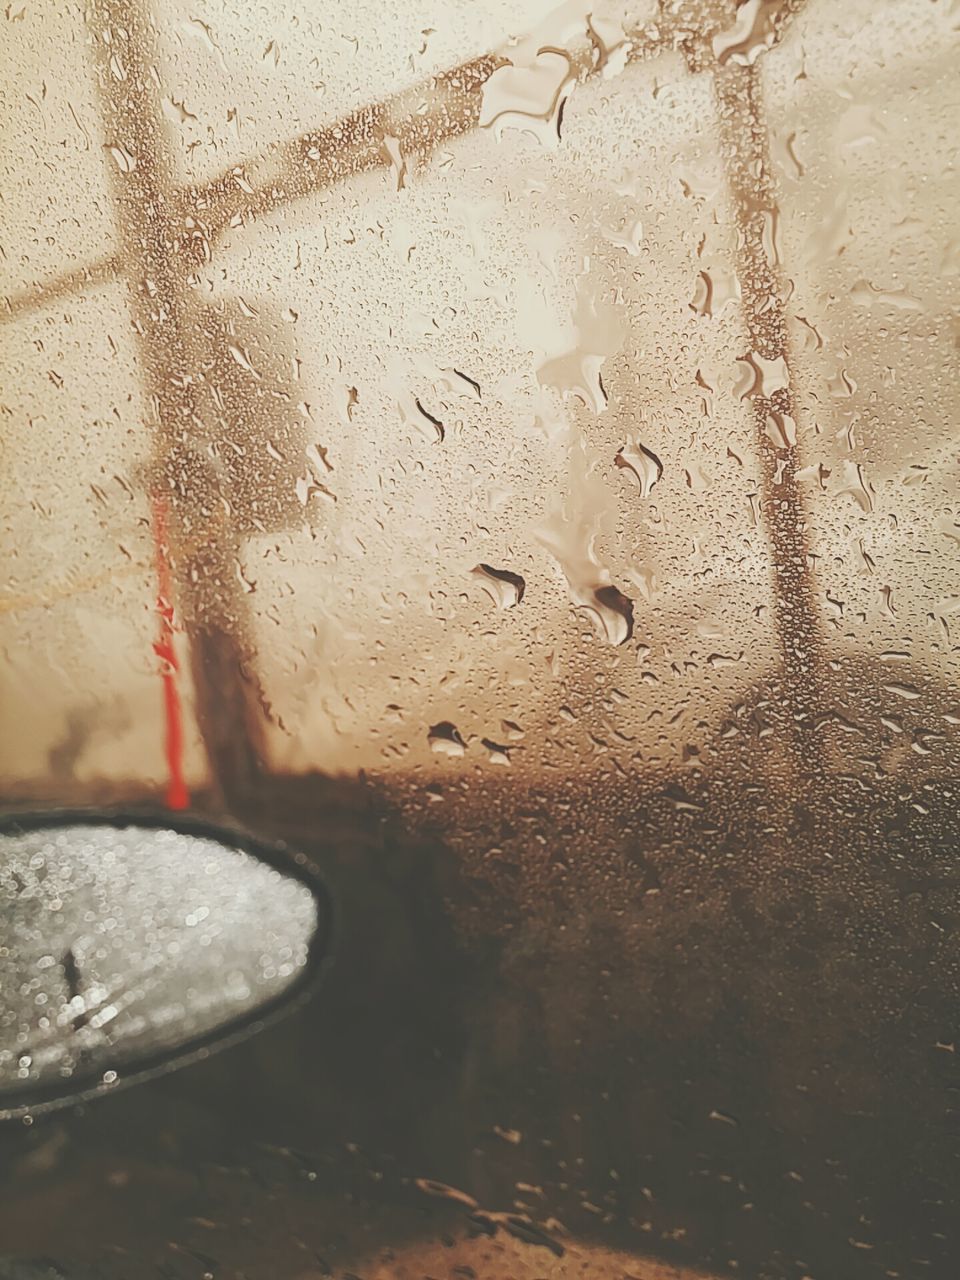 wet, drop, water, close-up, rain, transparent, glass - material, raindrop, indoors, window, weather, focus on foreground, glass, season, transportation, no people, car, full frame, monsoon, day